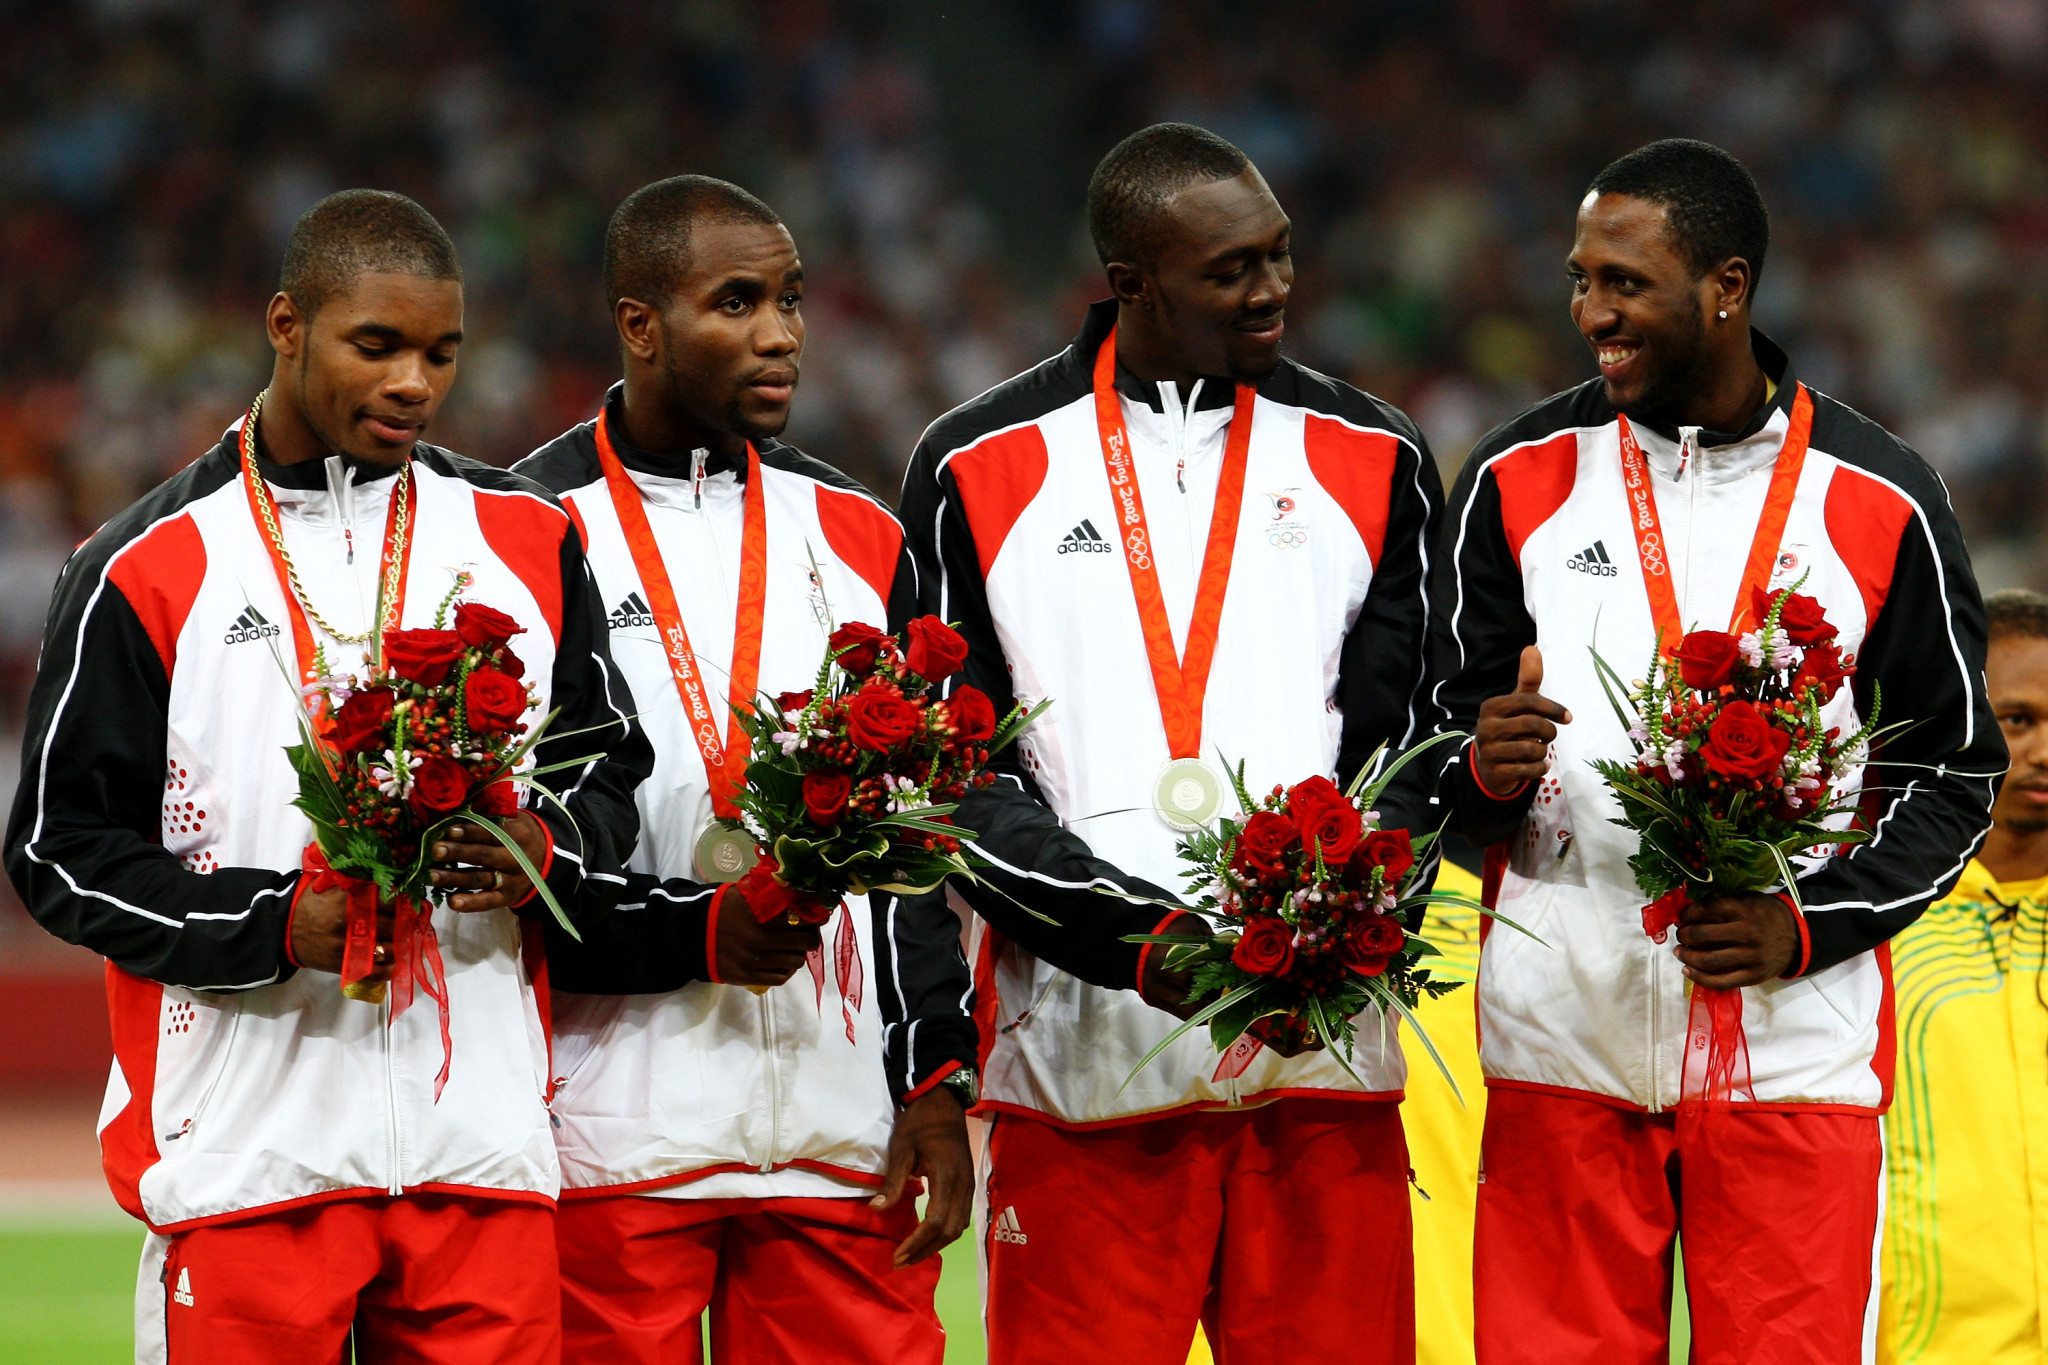 Trinidad and Tobago were initially awarded silver but upgraded to gold after a doping violation ©Getty Images